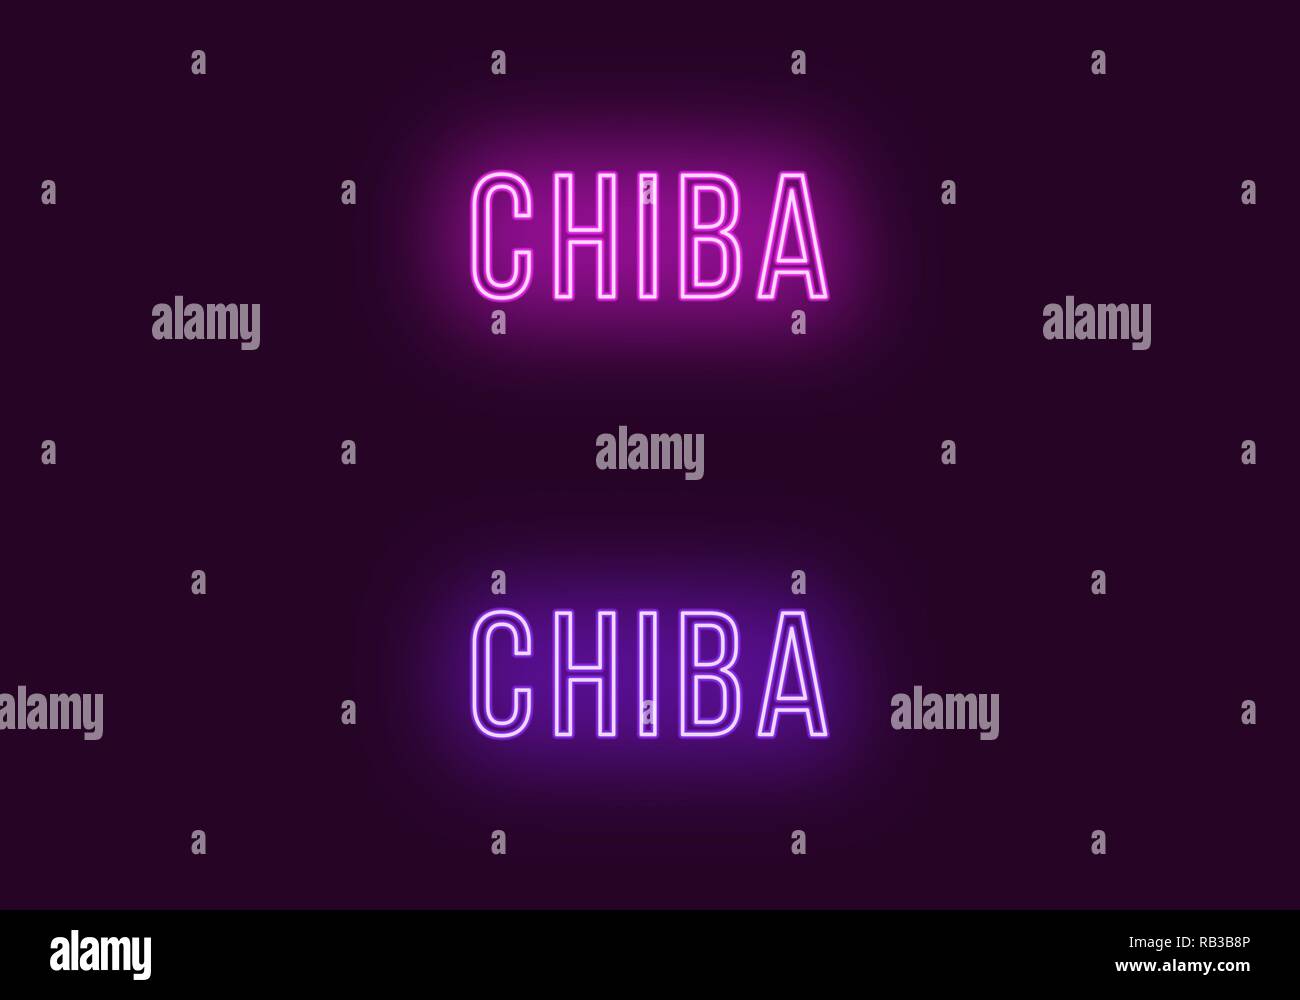 Neon name of Chiba city in Japan. Vector text of Chiba, Neon inscription with backlight in Thin style, purple and violet colors. Isolated glowing titl Stock Vector